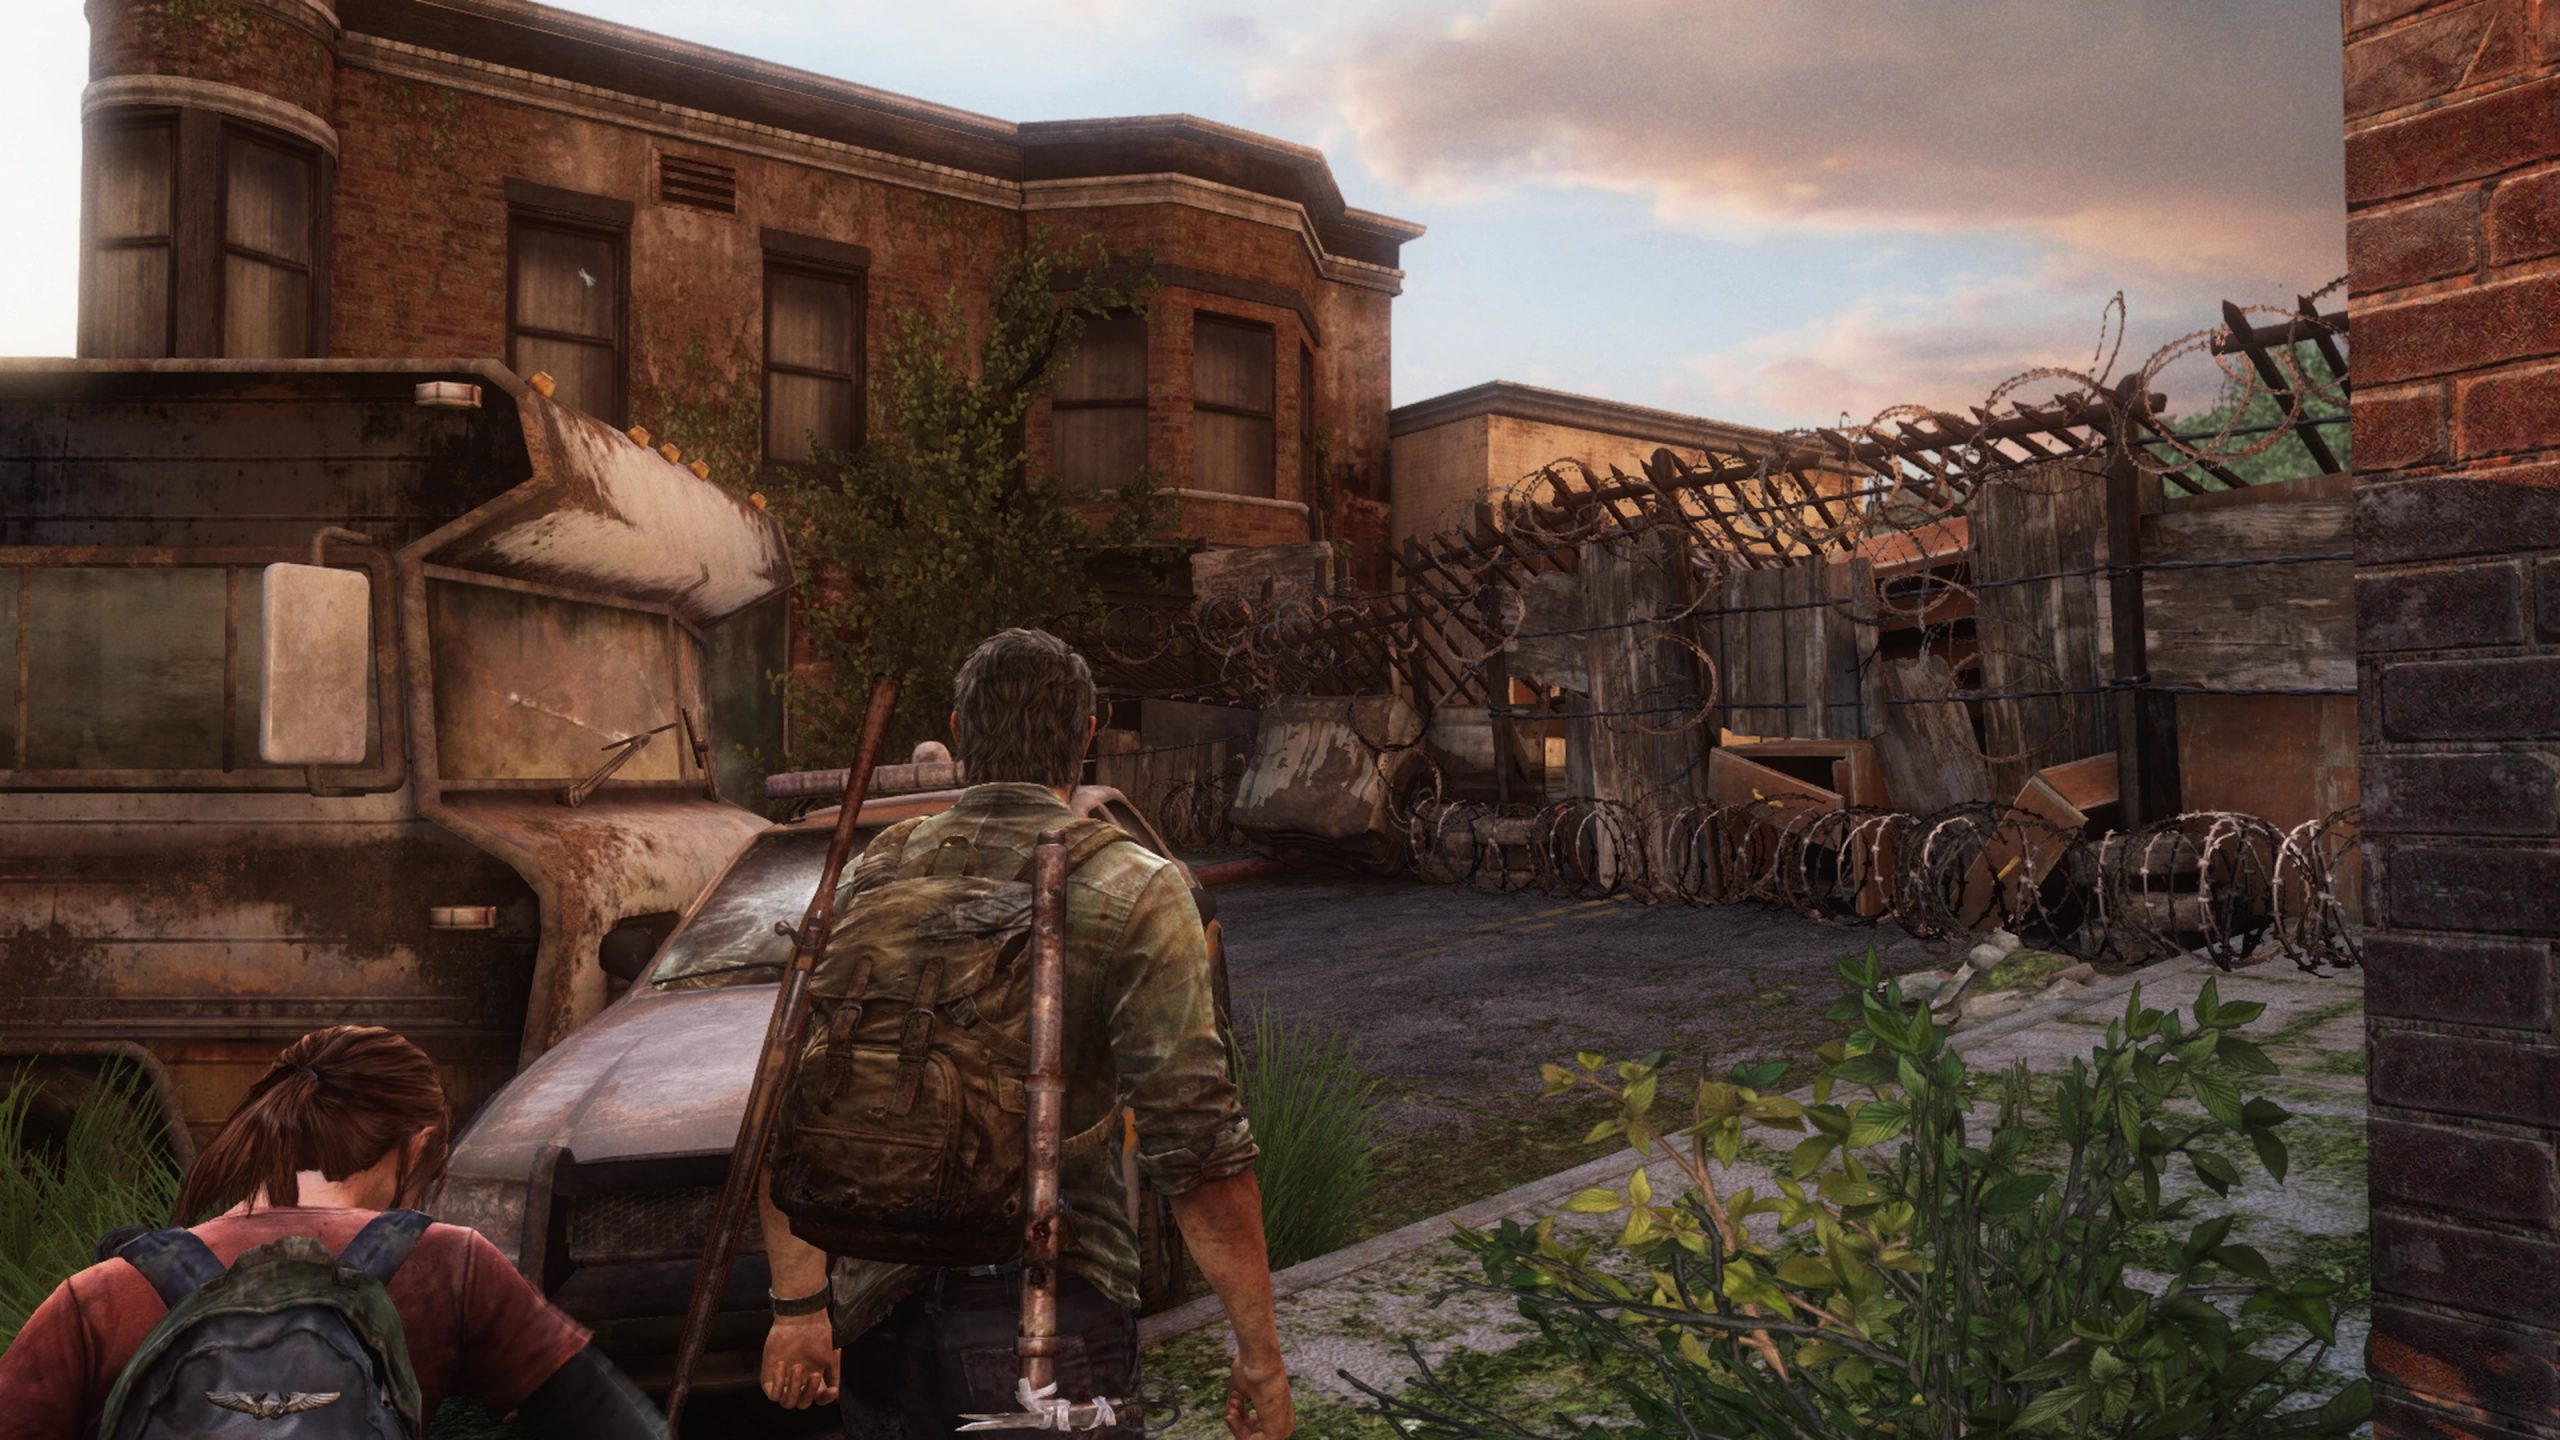 Show vs Game: The Last of Us Episode 3 – “Long, Long Time”